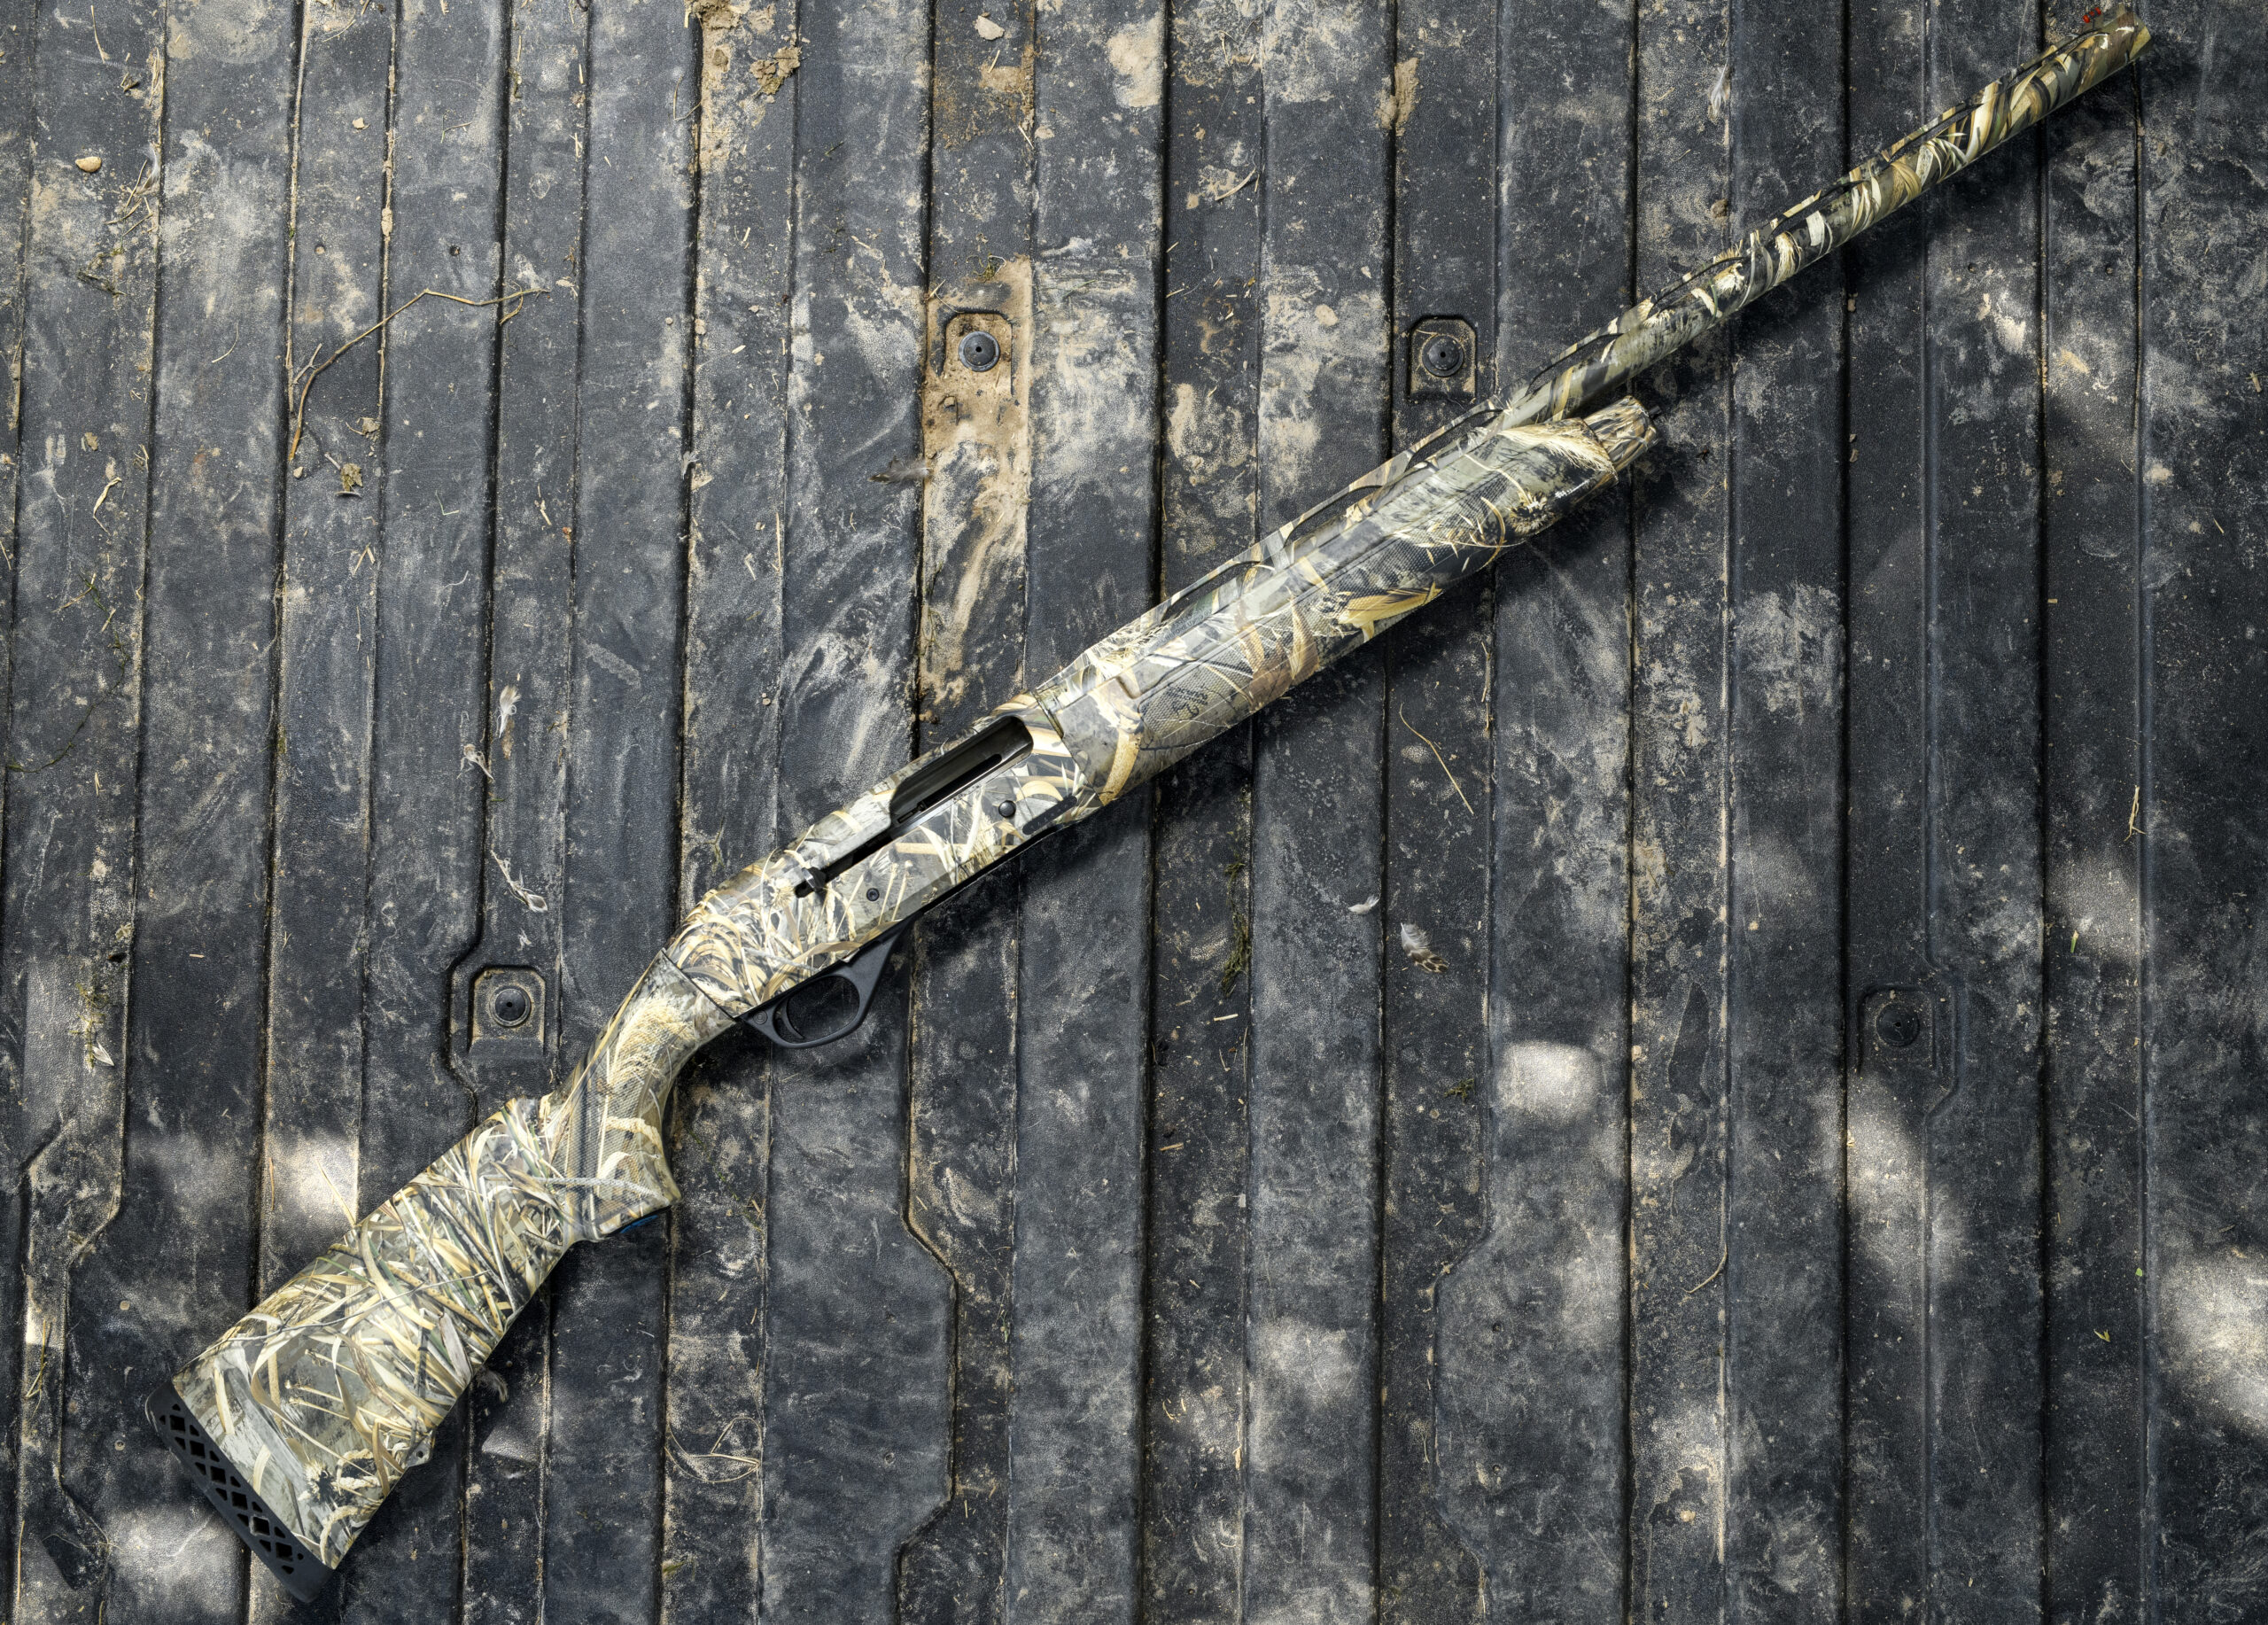 The Stoeger M3000 Patterns well, but has some functionality issues.